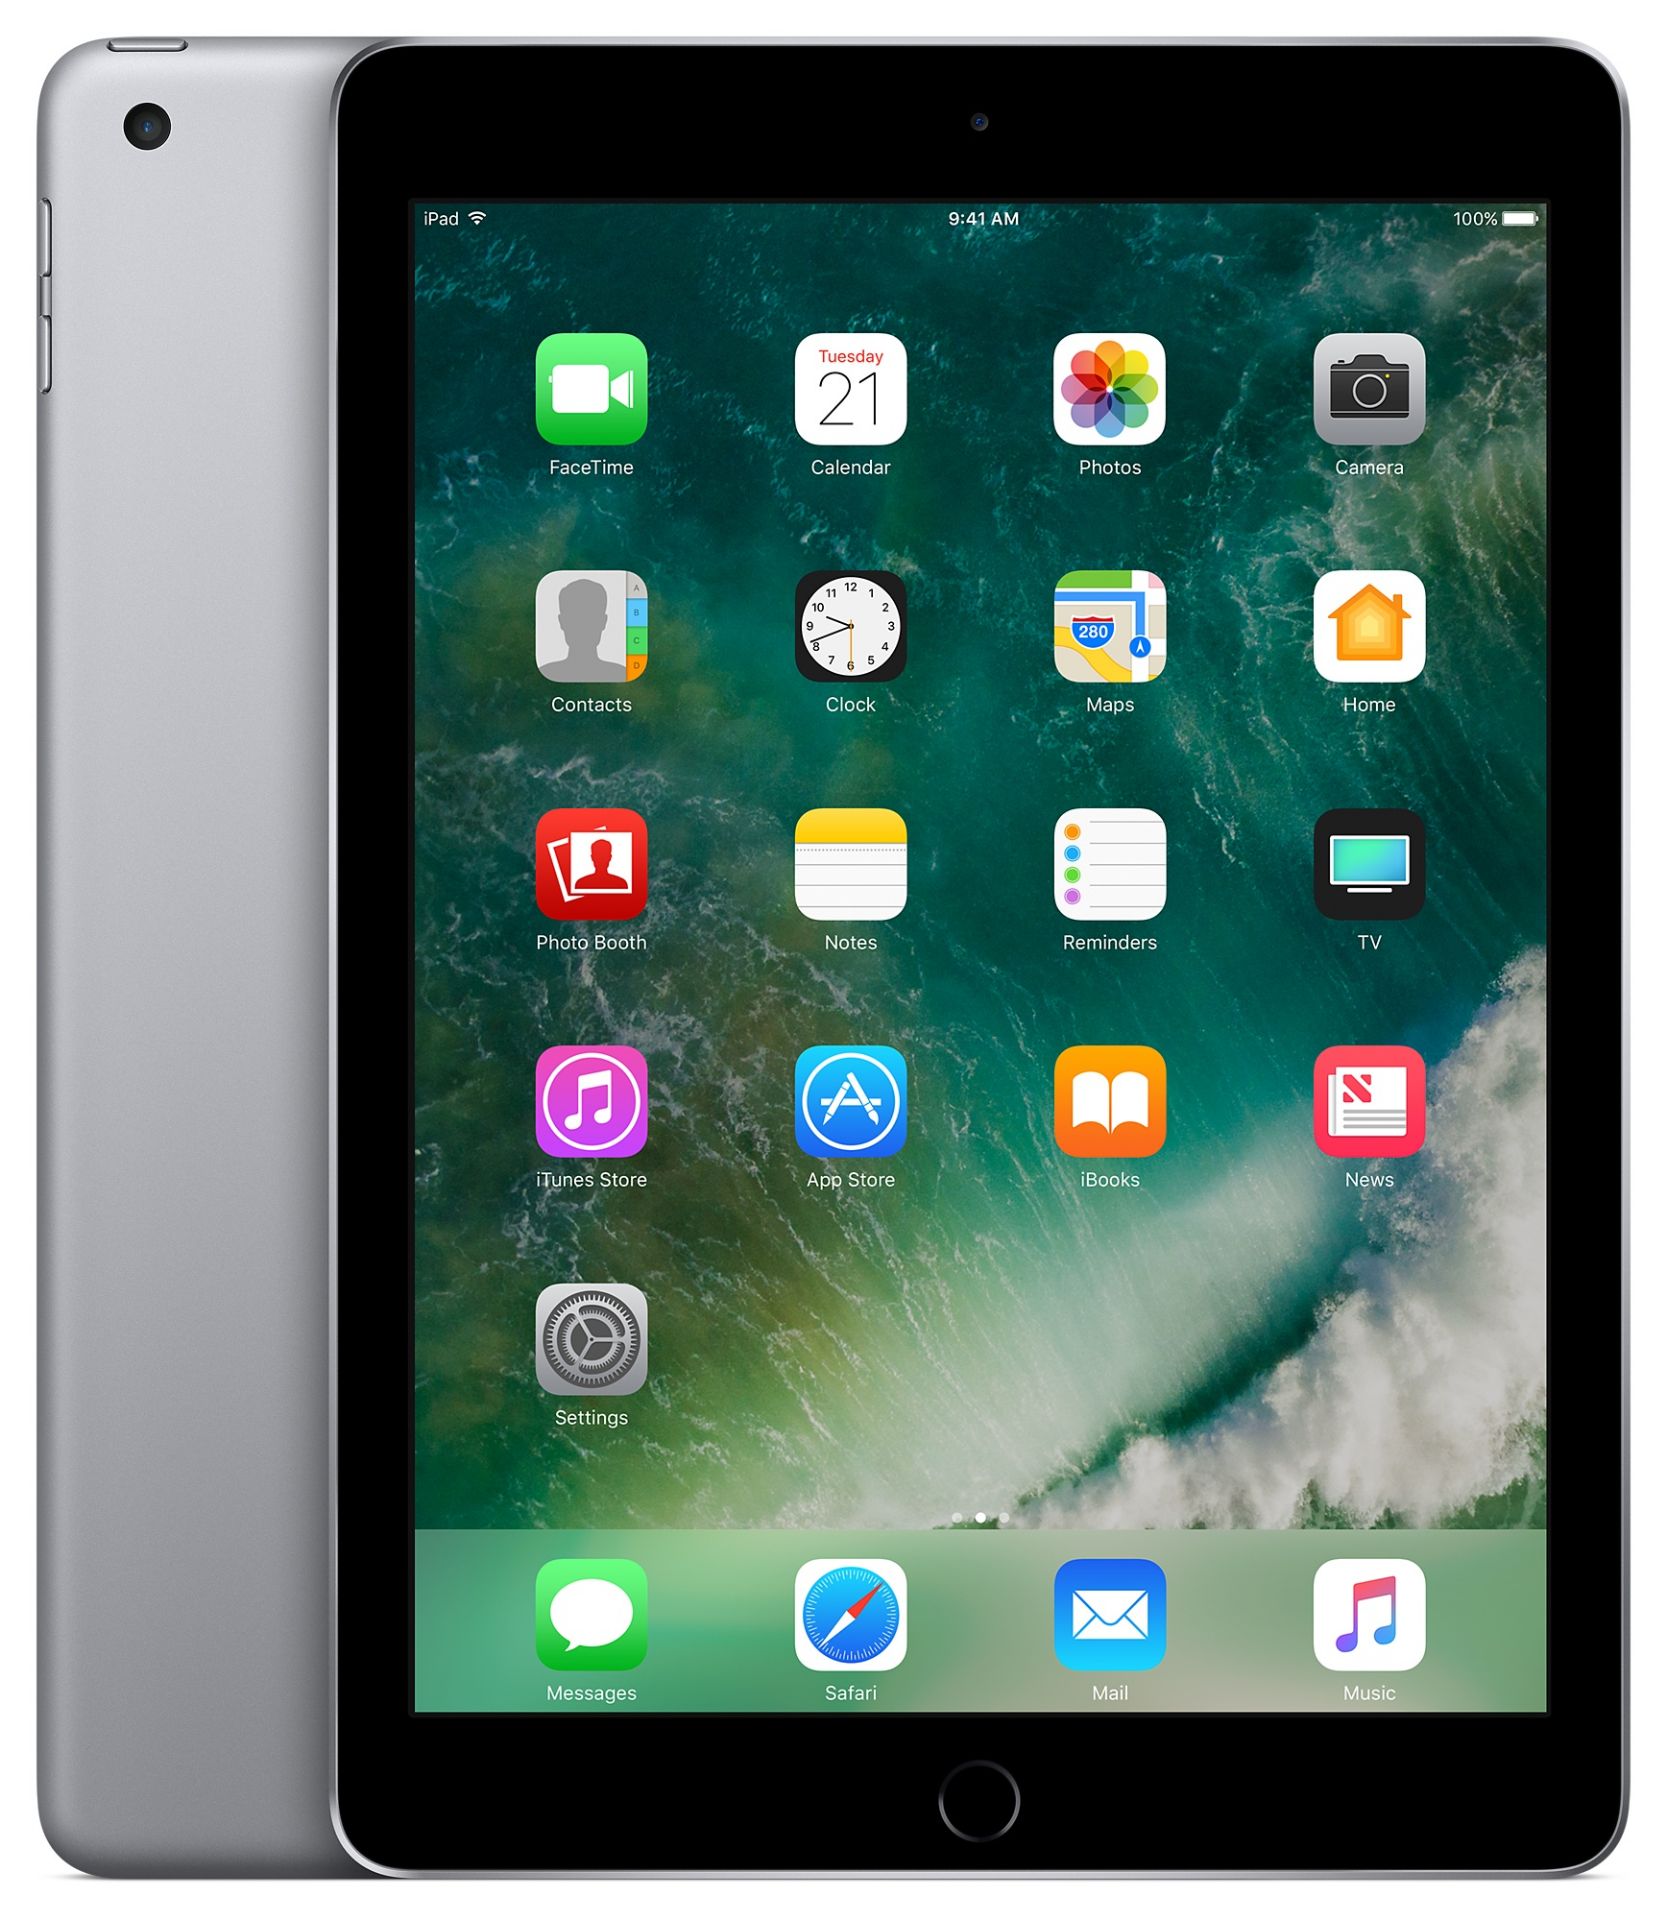 V Grade A Apple iPad Air 16GB Space Grey - Wi-Fi - In Generic Box With Apple Accessories X 2 YOUR